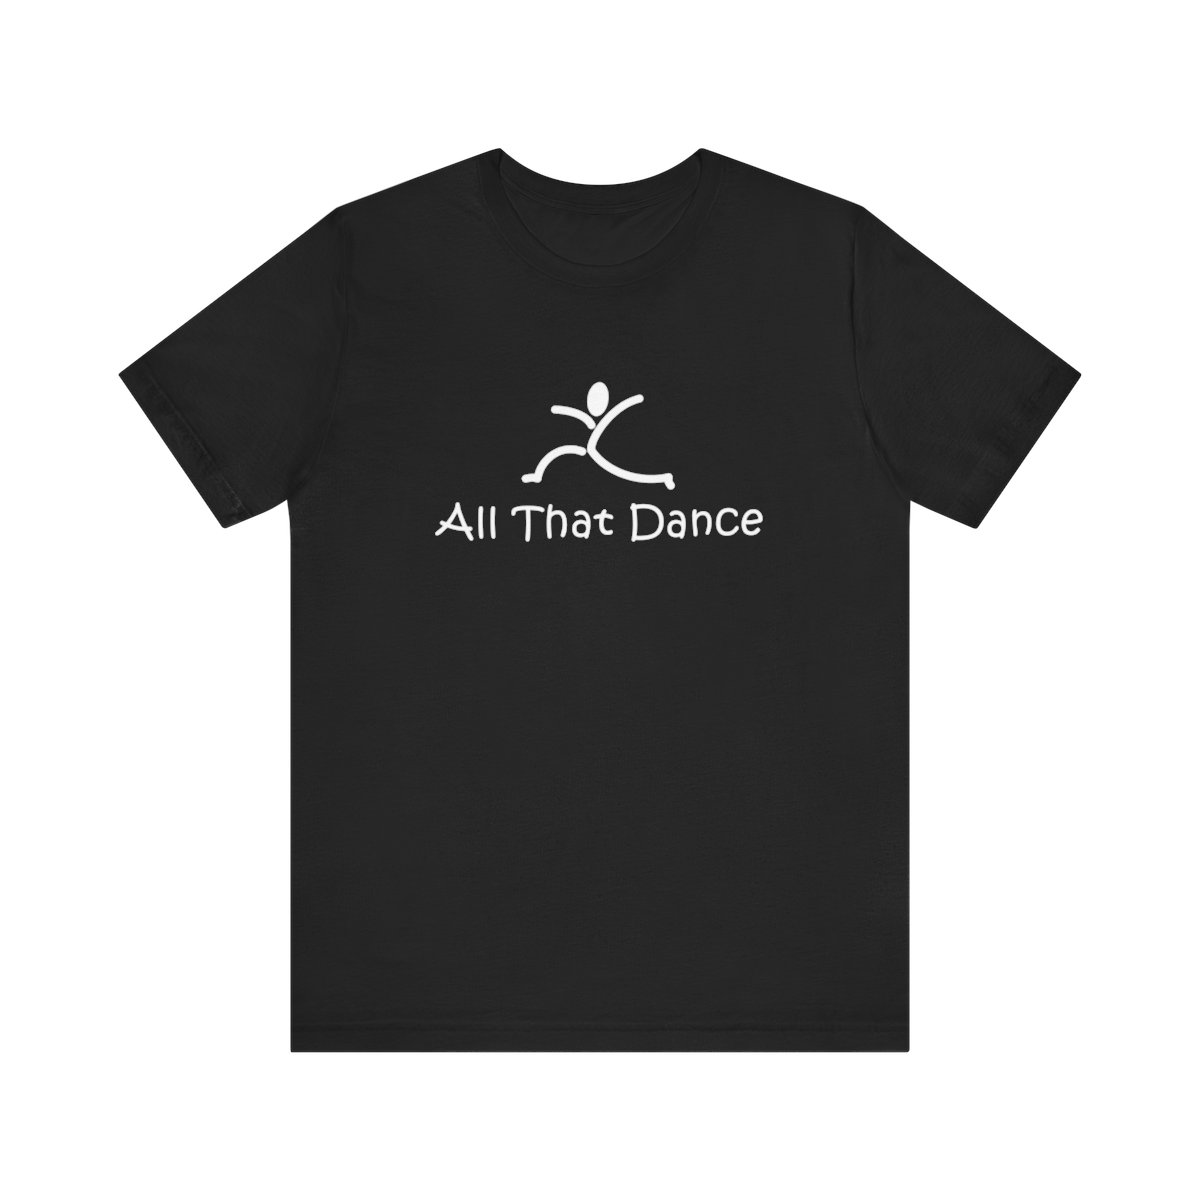 ADULT SIZES - All That Dance Tshirts product main image